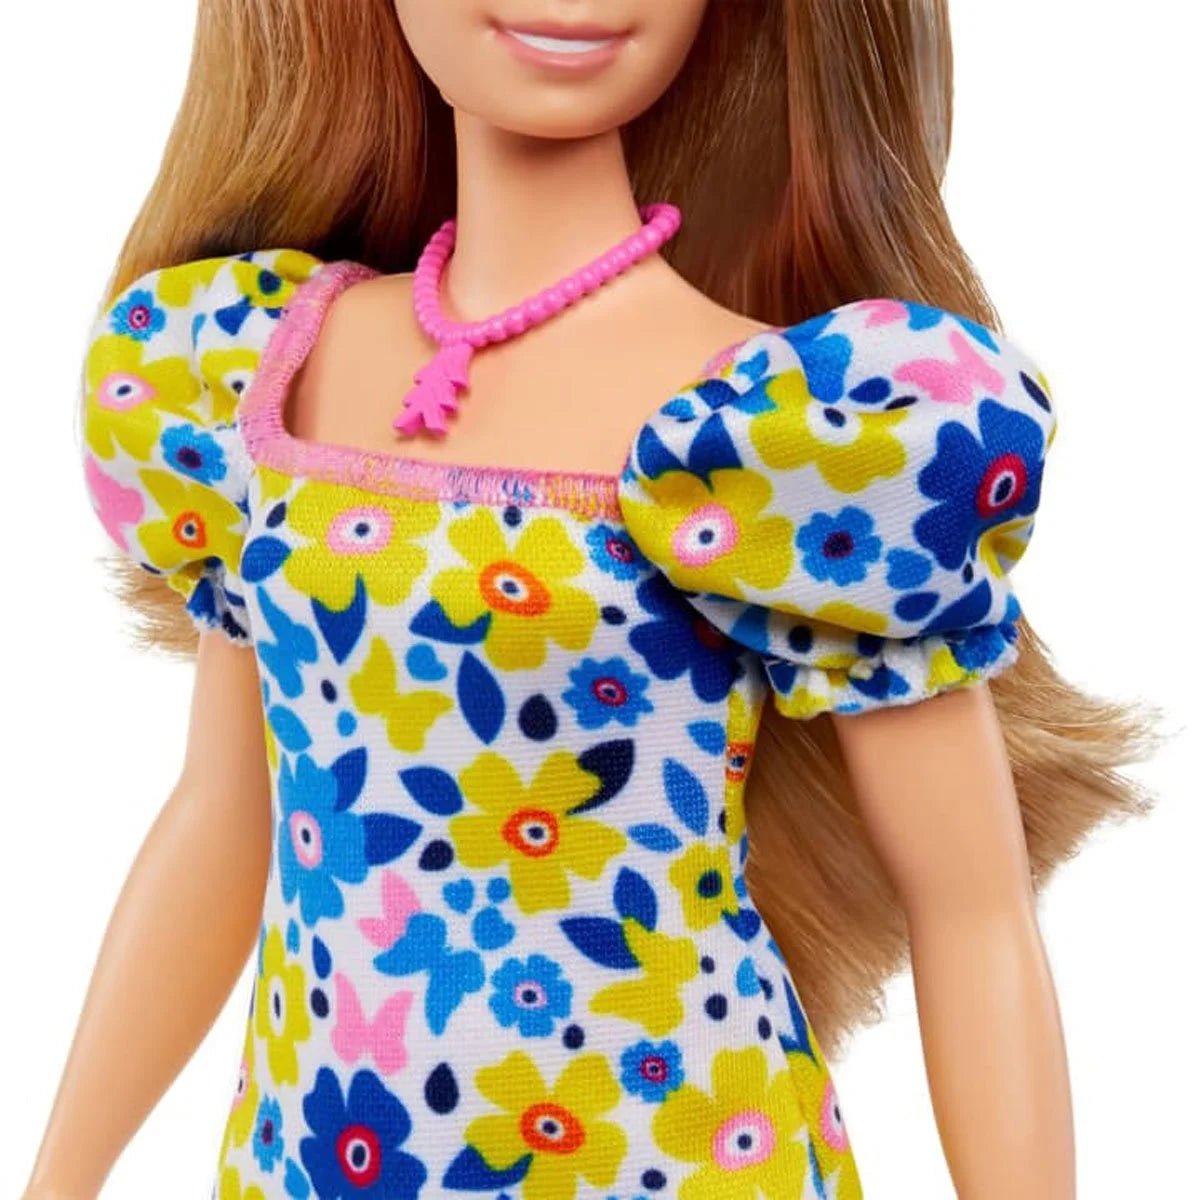 Barbie Fashionista Doll #208 with Floral Babydoll Dress - Simon's Collectibles